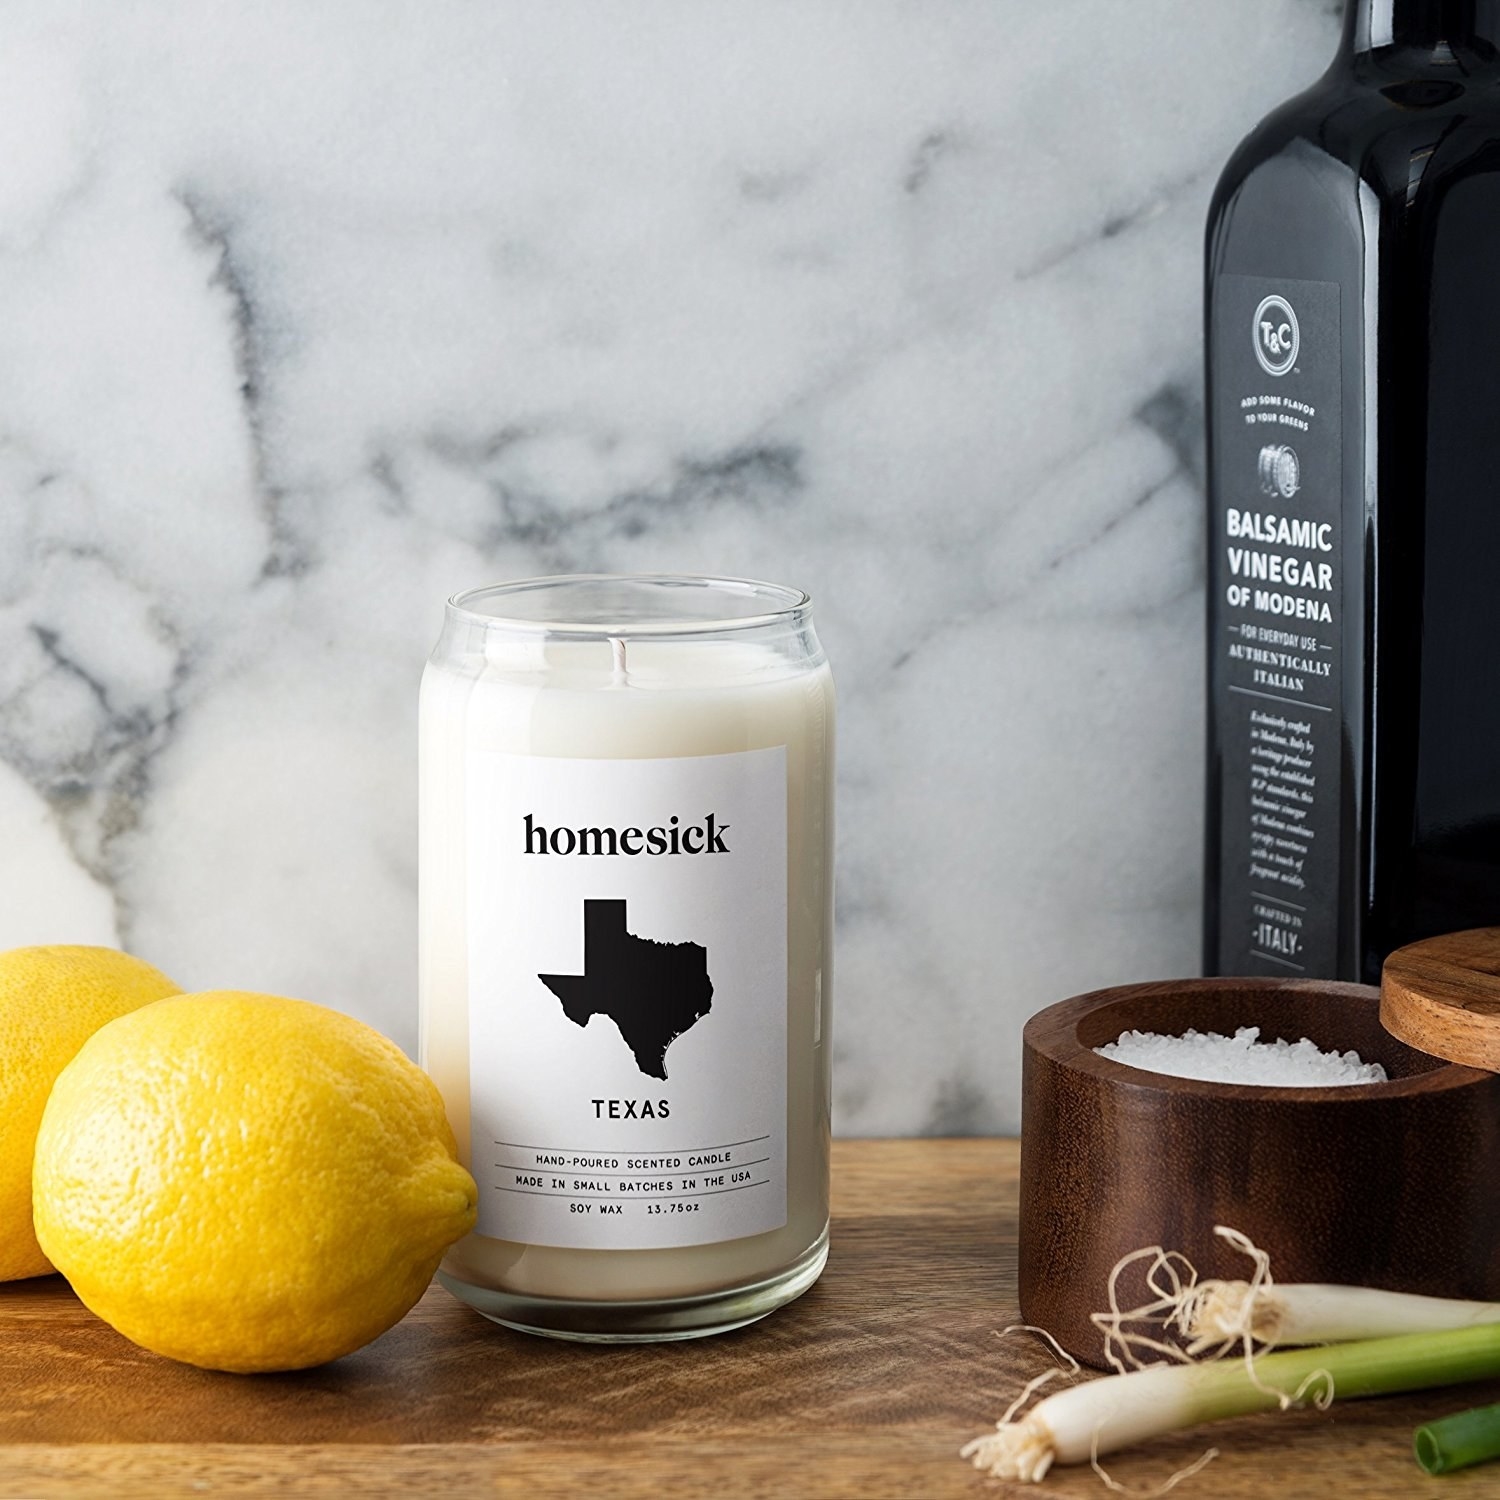 The Texas Homesick candle. 